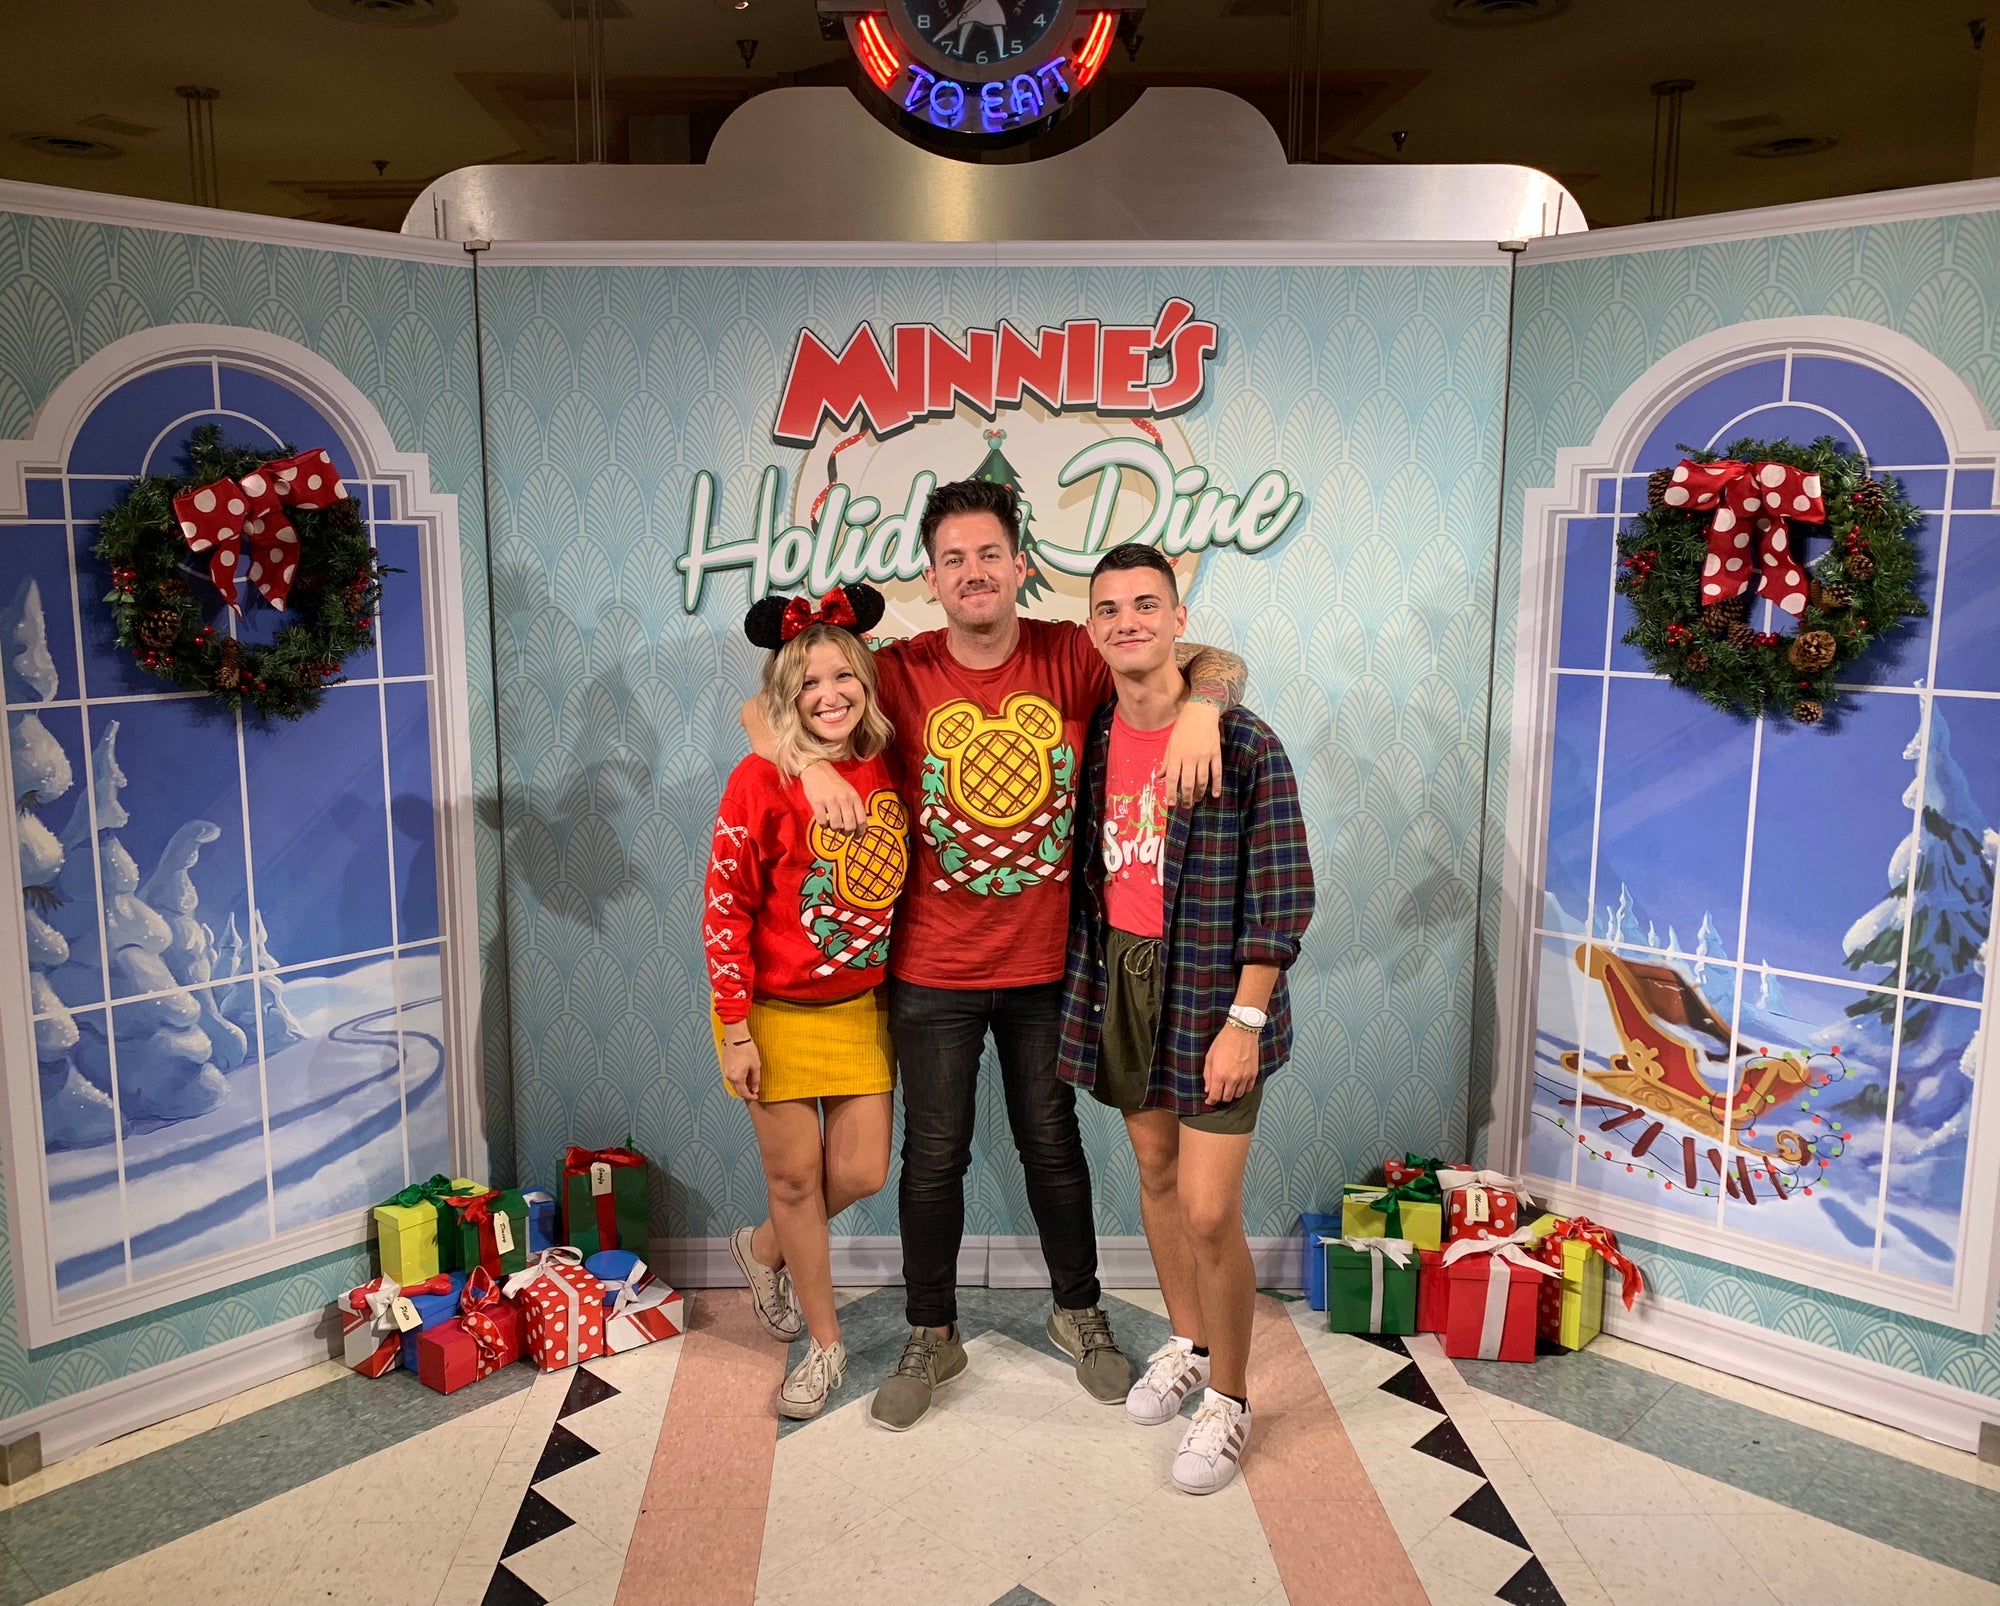 Minnie's Holiday Dine at Hollywood & Vine in Hollywood Studios